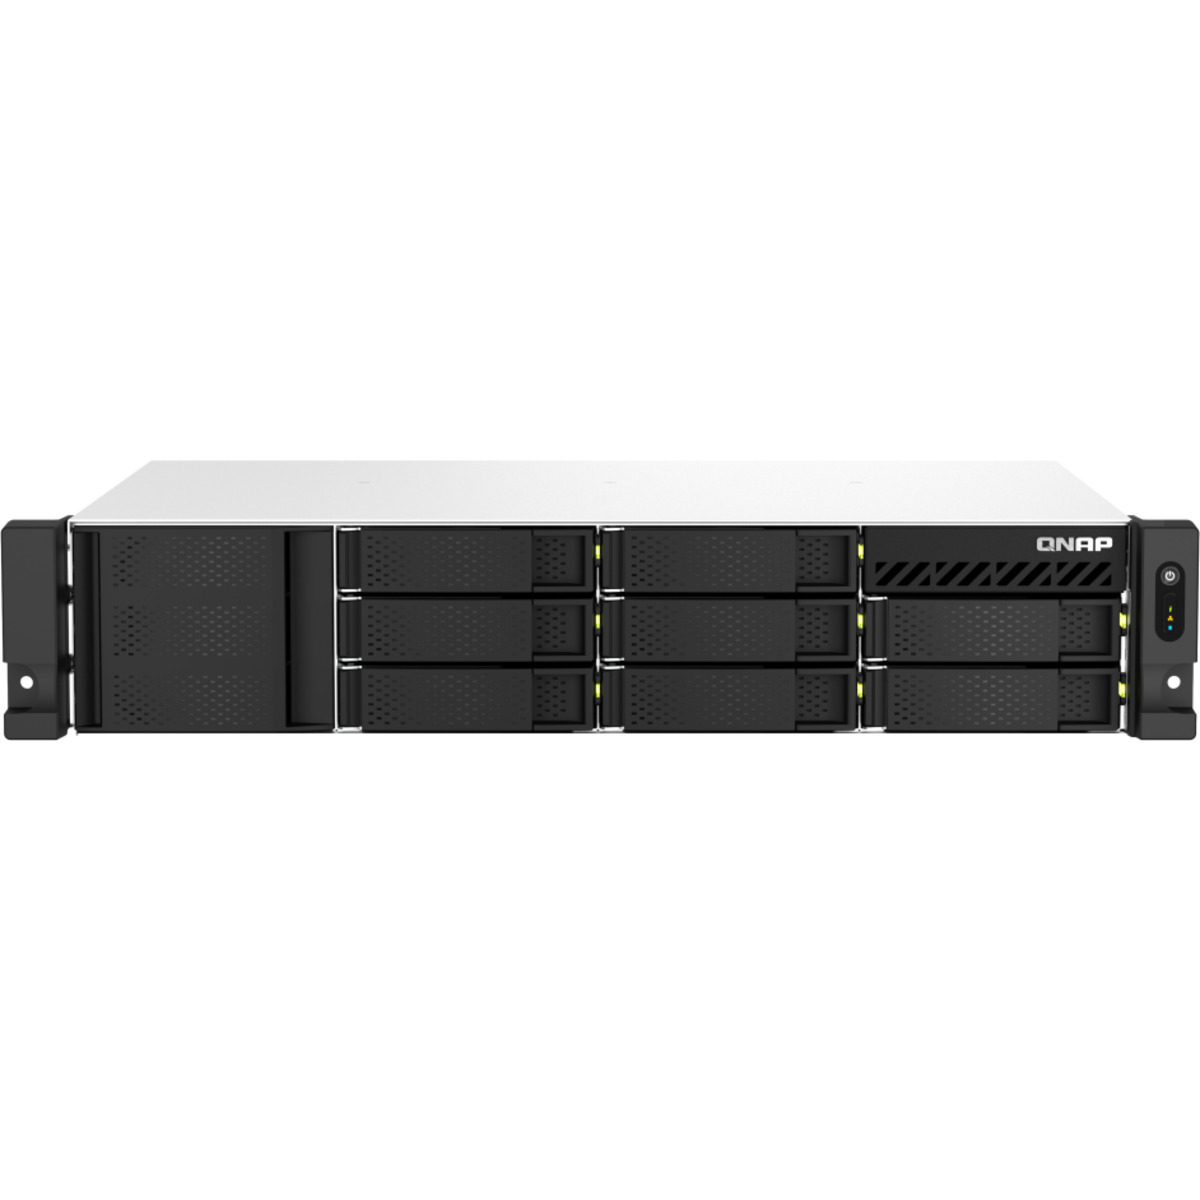 QNAP TS-873AeU-RP 40tb 8-Bay RackMount Multimedia / Power User / Business NAS - Network Attached Storage Device 5x8tb Samsung 870 QVO MZ-77Q8T0 2.5 560/530MB/s SATA 6Gb/s SSD CONSUMER Class Drives Installed - Burn-In Tested - FREE RAM UPGRADE TS-873AeU-RP